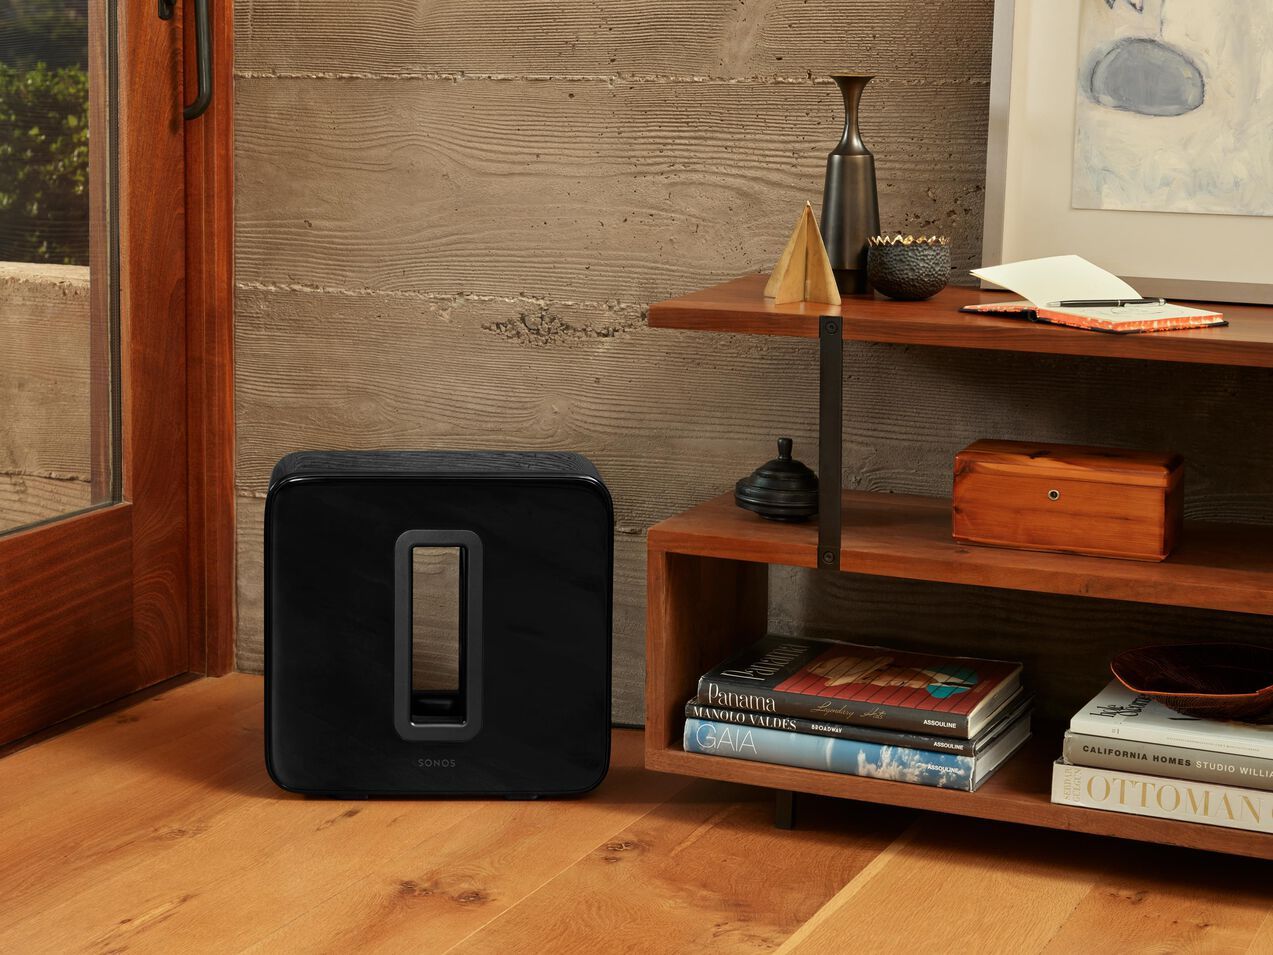 a black sonos sub sits on a wooden floor installed and sold by fisher electronics in norwalk ohio